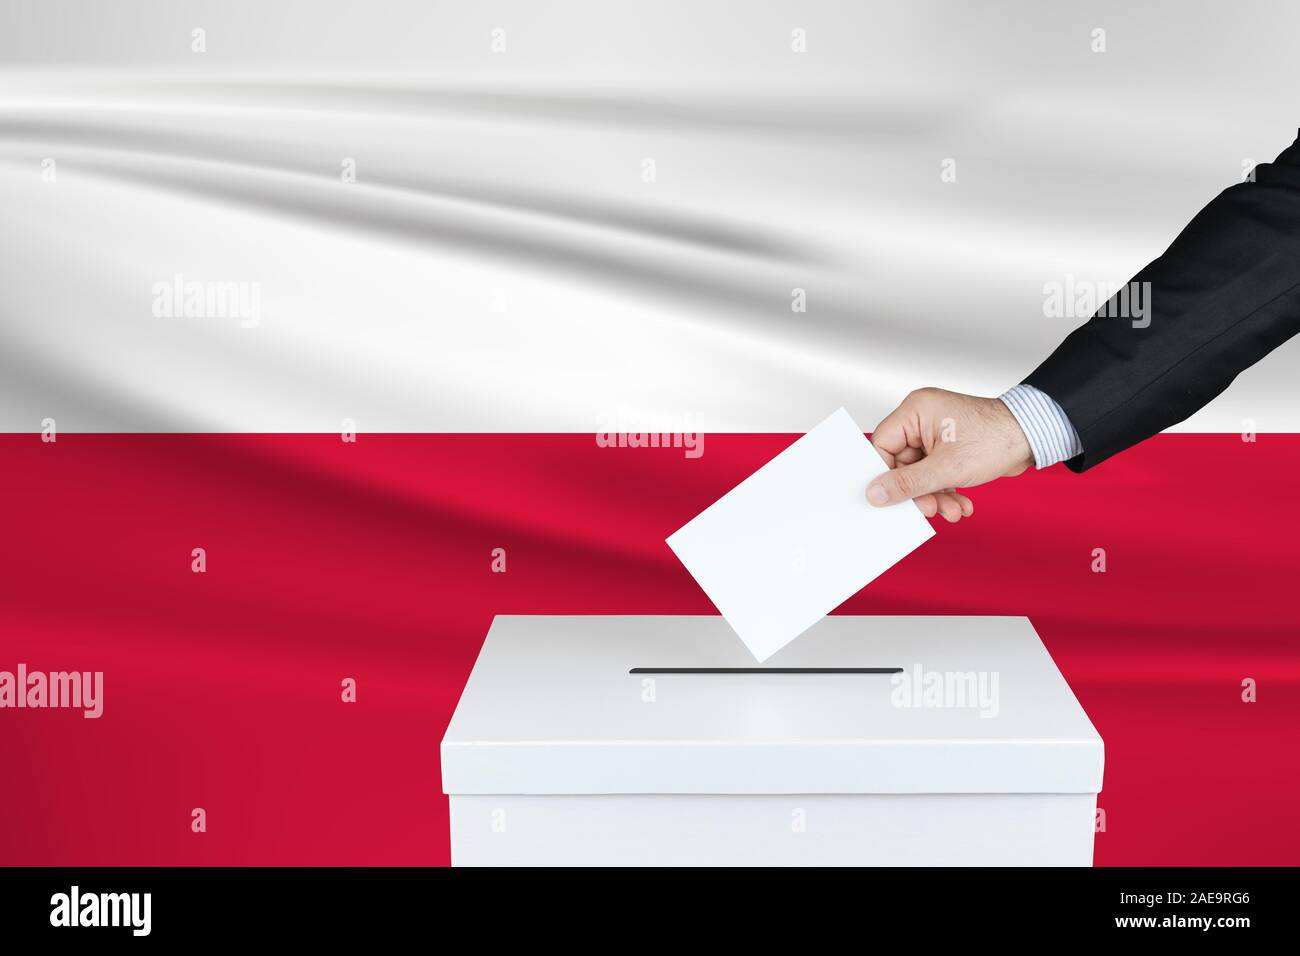 Election in Poland. The hand of man putting his vote in the ballot box. Waved Poland flag on background. Stock Photo